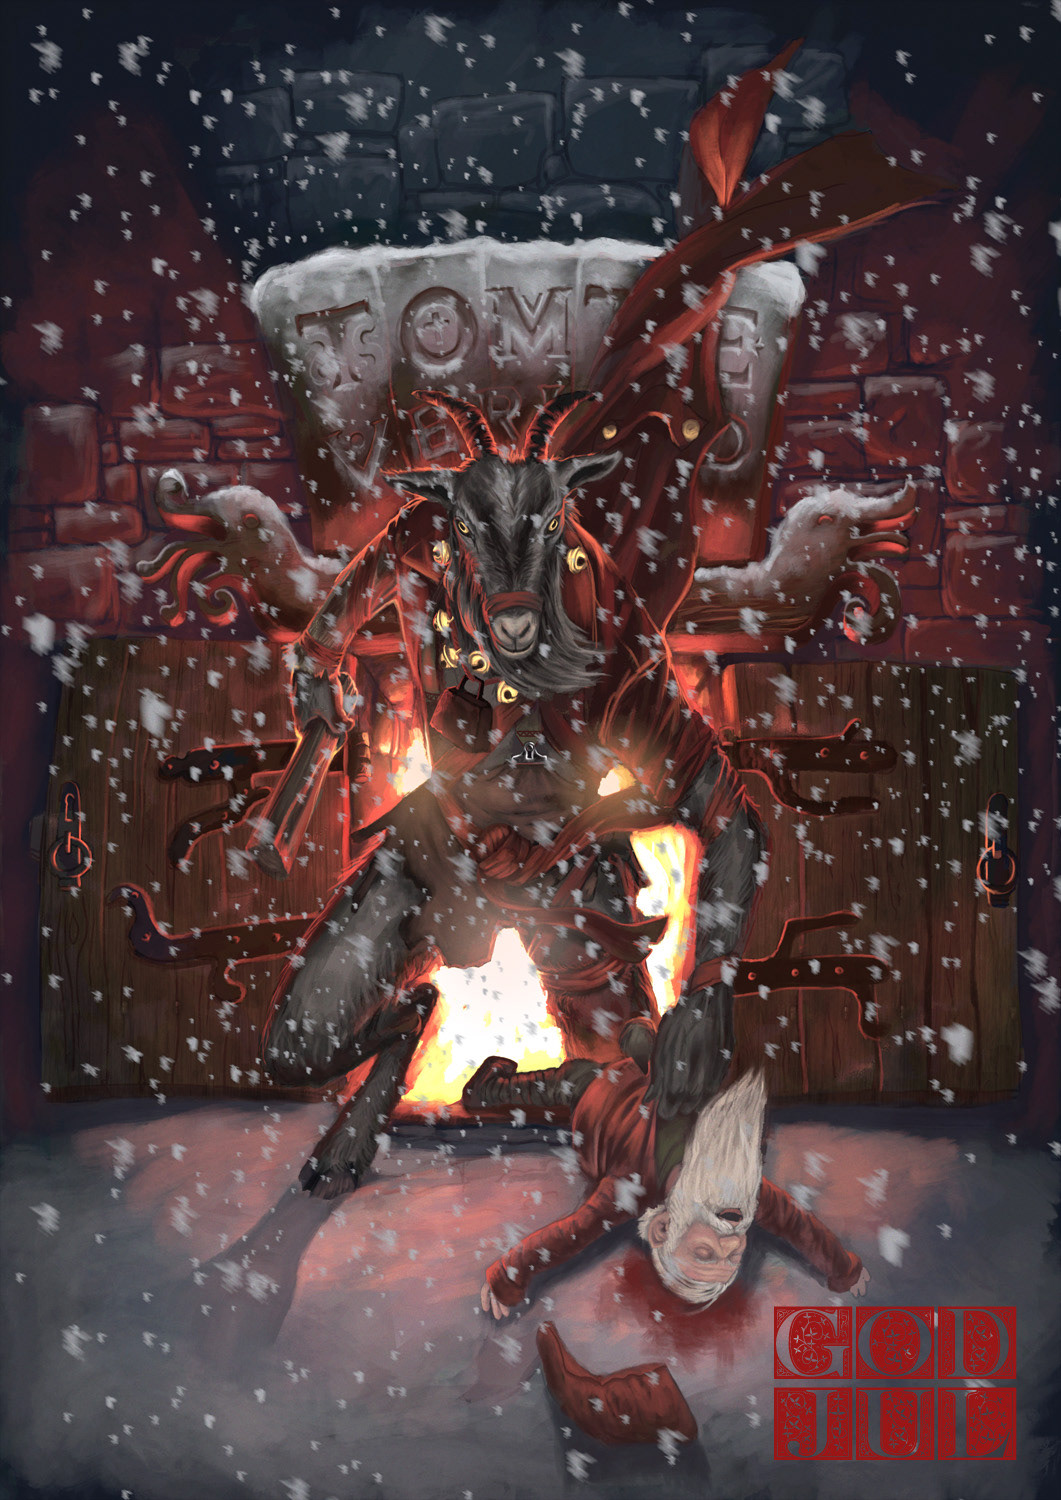 yule goat Sweden tradition magazine card greetings Holiday holidays Swedish old Folklore superstition evil